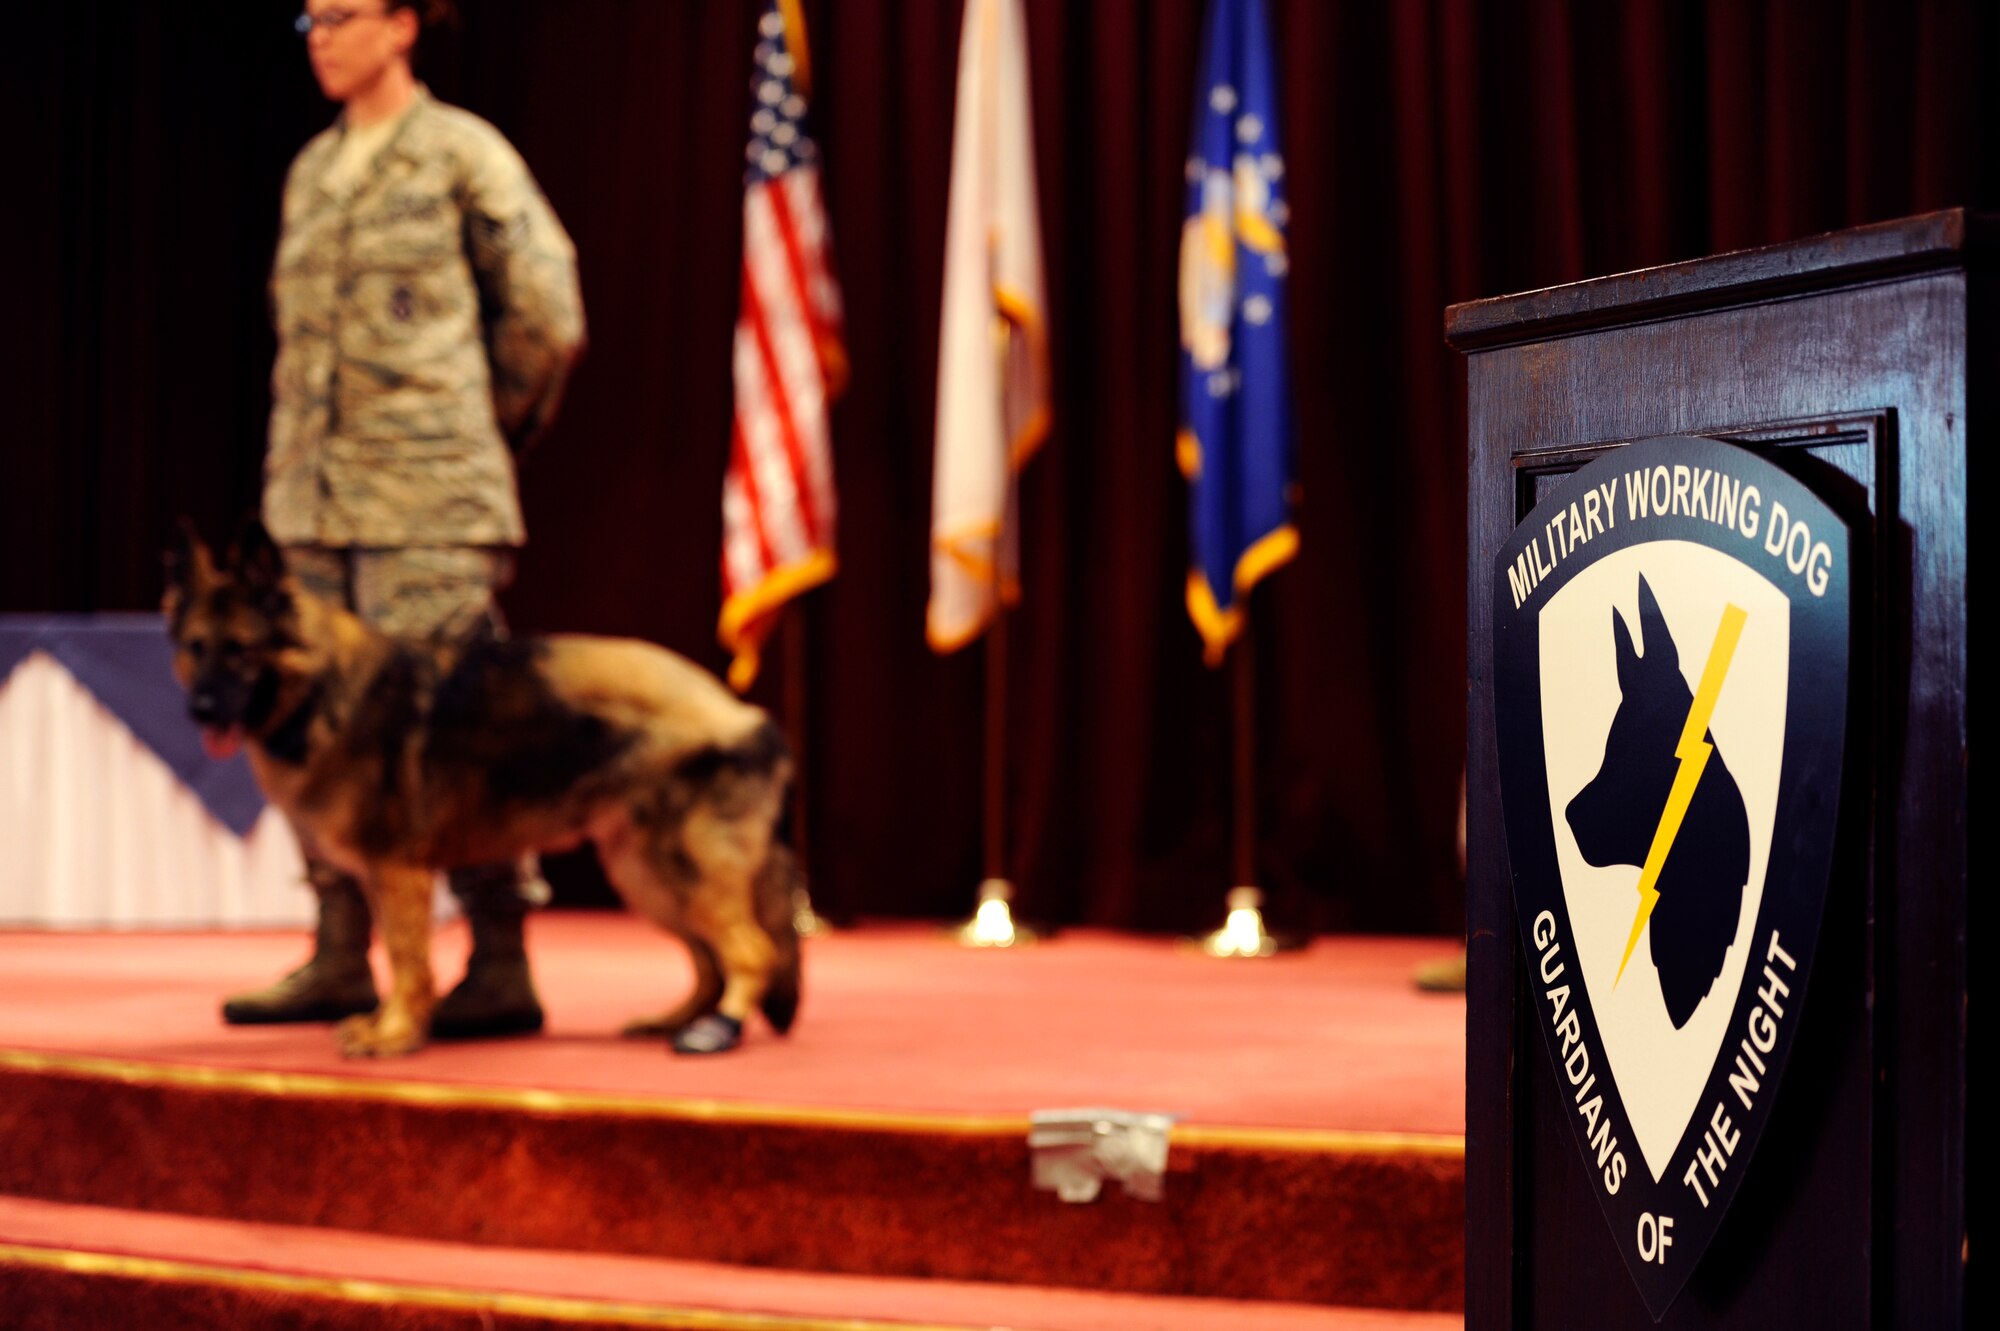 U.S. Air Force Staff Sgt. Codi Carter, 18th Security Forces Squadron military working dog trainer, stands with retiring MWD Shara during a MWD retirement ceremony on Kadena Air Base, Japan, June 13, 2013. During the retirement, four Air Force MWDs, Missa, Shara, Nemo and Zina, were retired and adopted by their final handlers after numerous years of service. (U.S. Air Force photo by Senior Airman Maeson L. Elleman/Released)